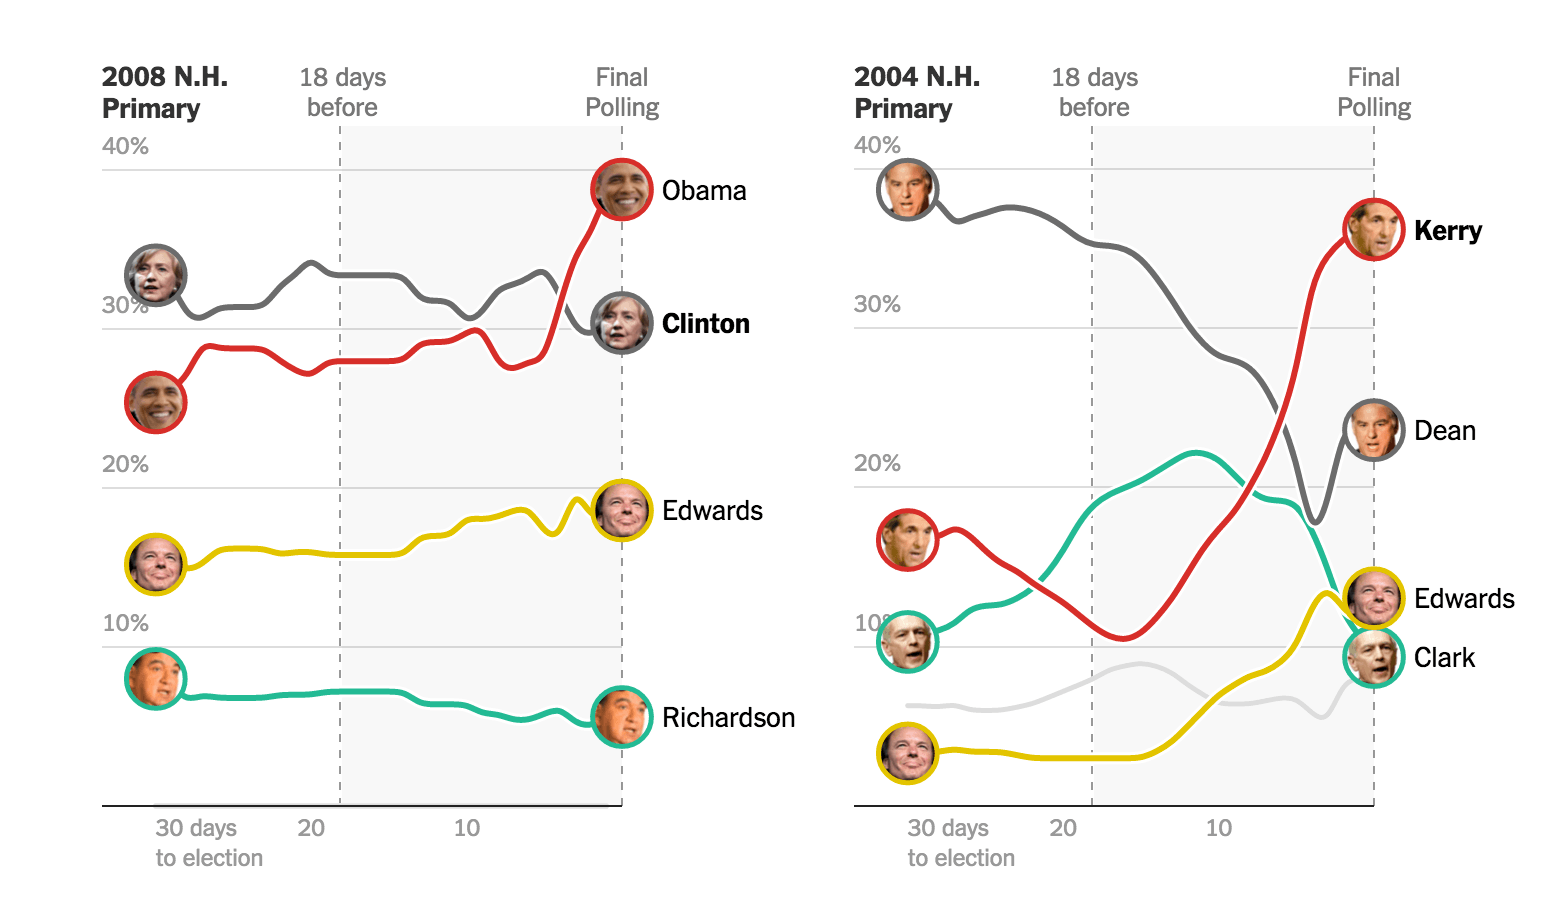 Who Is Leading the Iowa and New Hampshire Polls